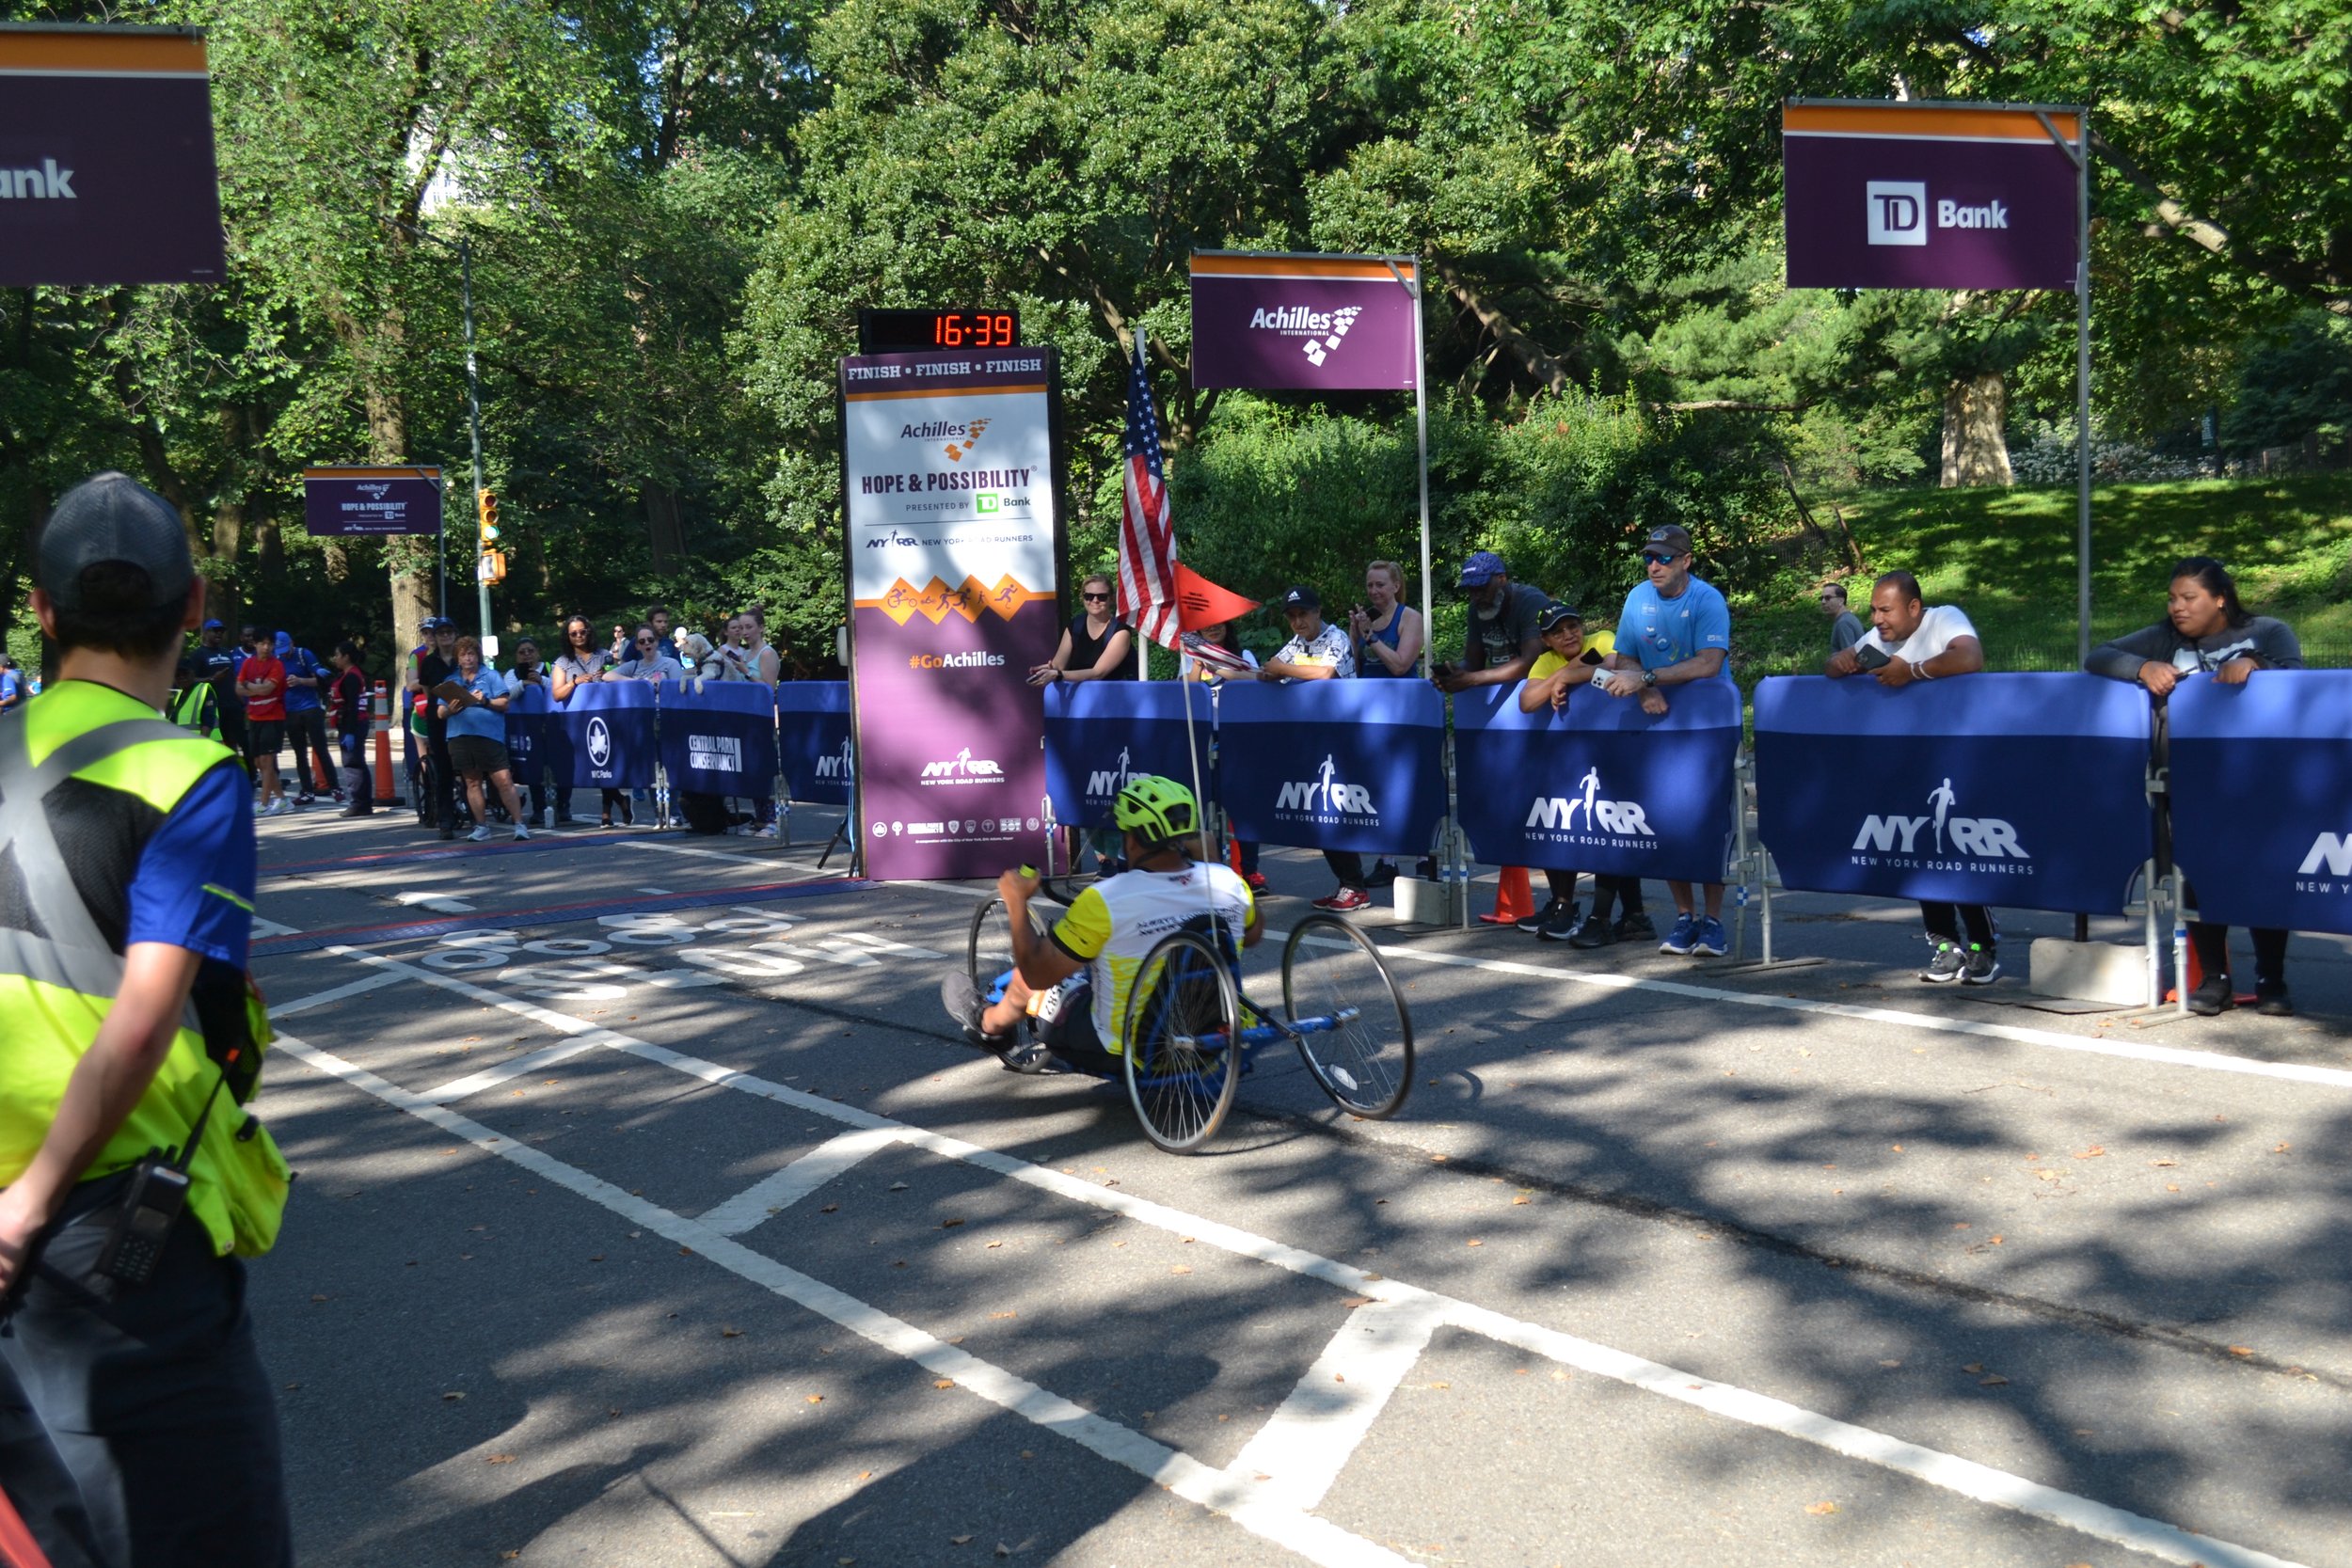  Handcycle athlete crossing the Hope and Possibility Finish Line 